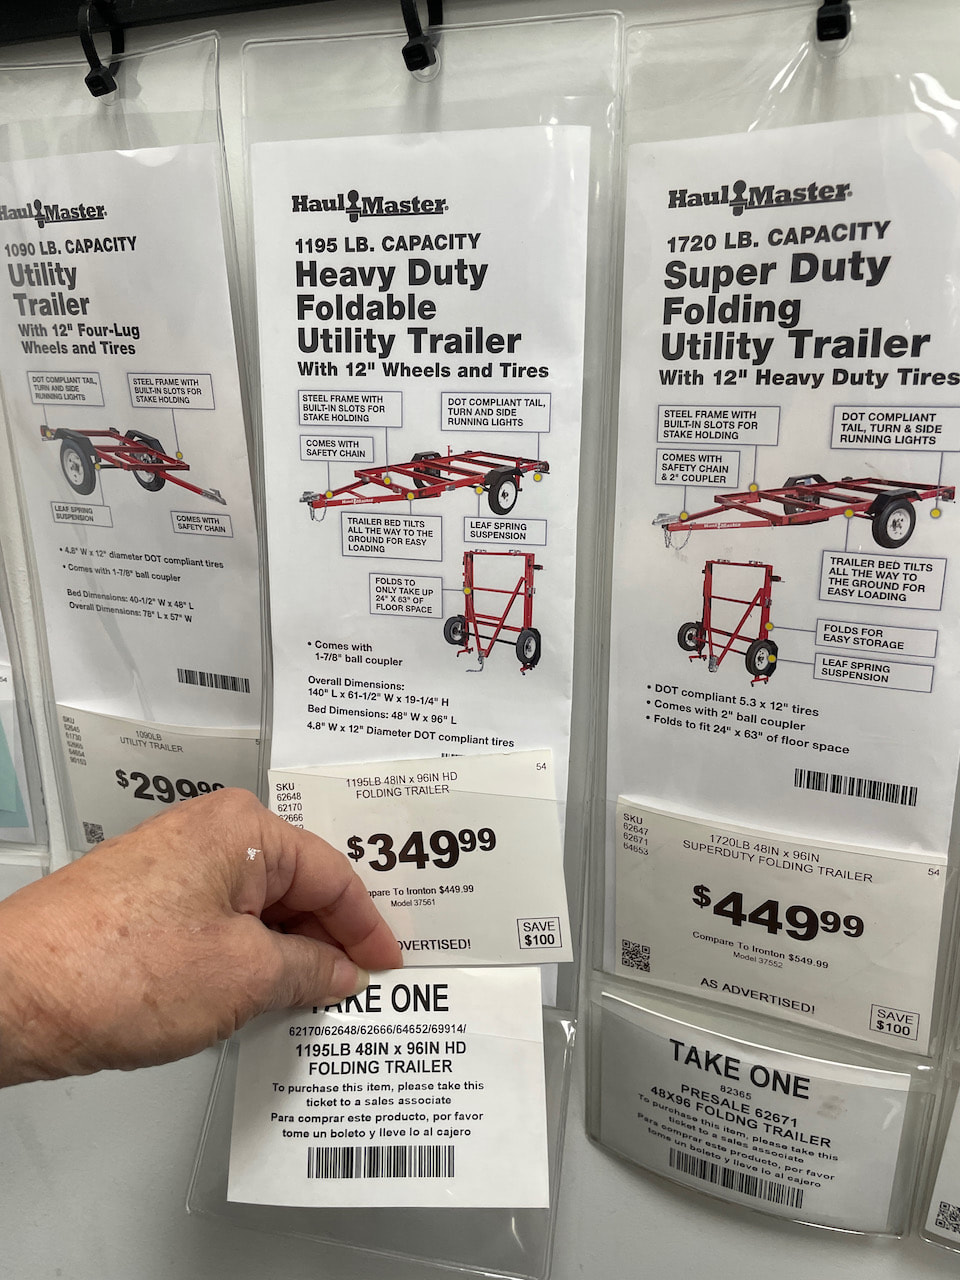 Take the purchase ticket to the cashier to buy the haul master harbor freight trailer. 